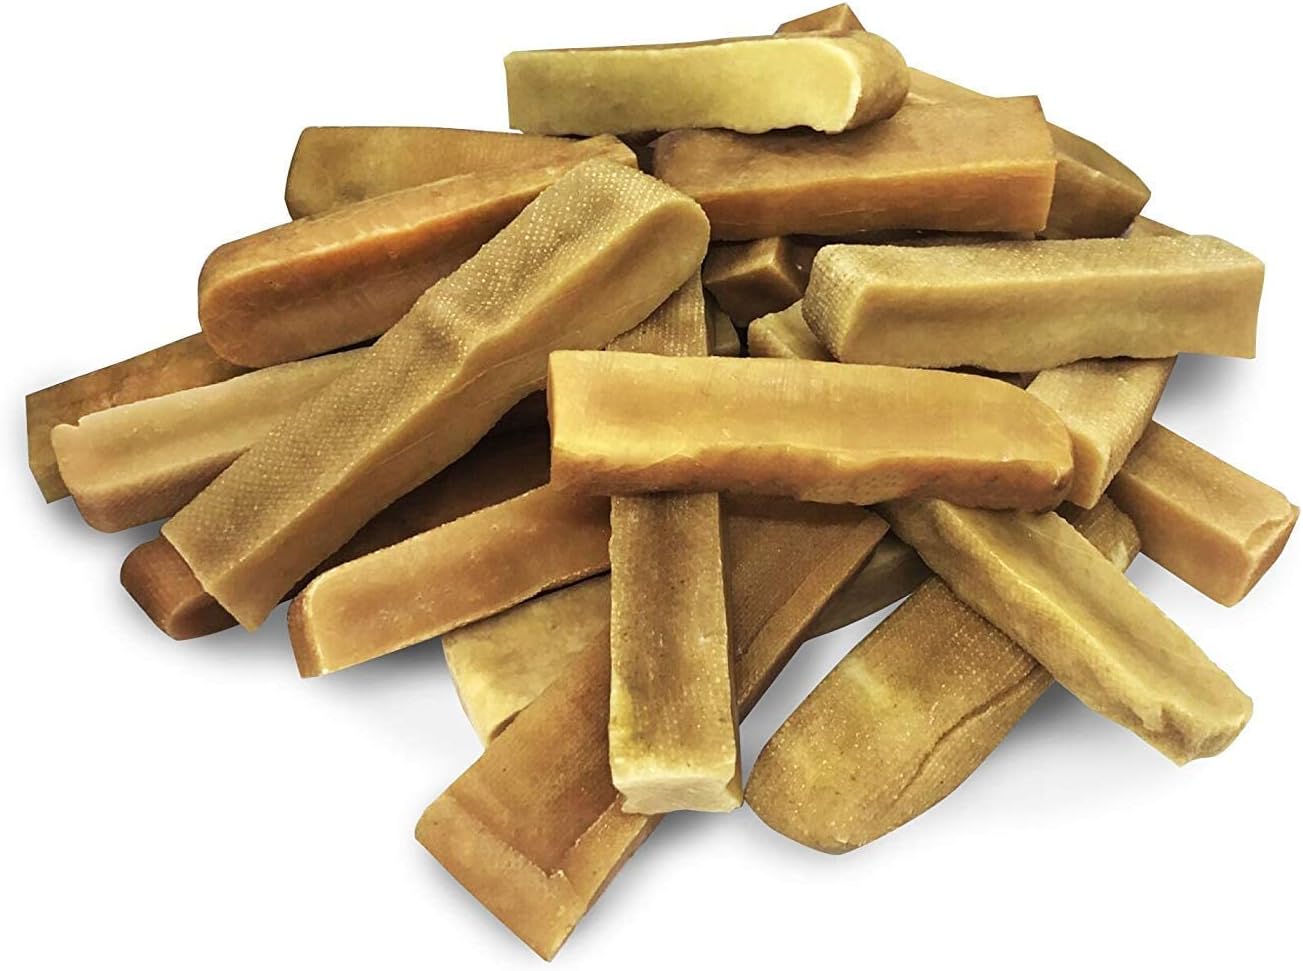 EcoKind Pet Treats Gold Yak Dog Chews | Great for Dogs, Treat for Dogs, Keeps Dogs Busy & Enjoying, Indoors & Outdoor Use (1 Stick) : Pet Supplies